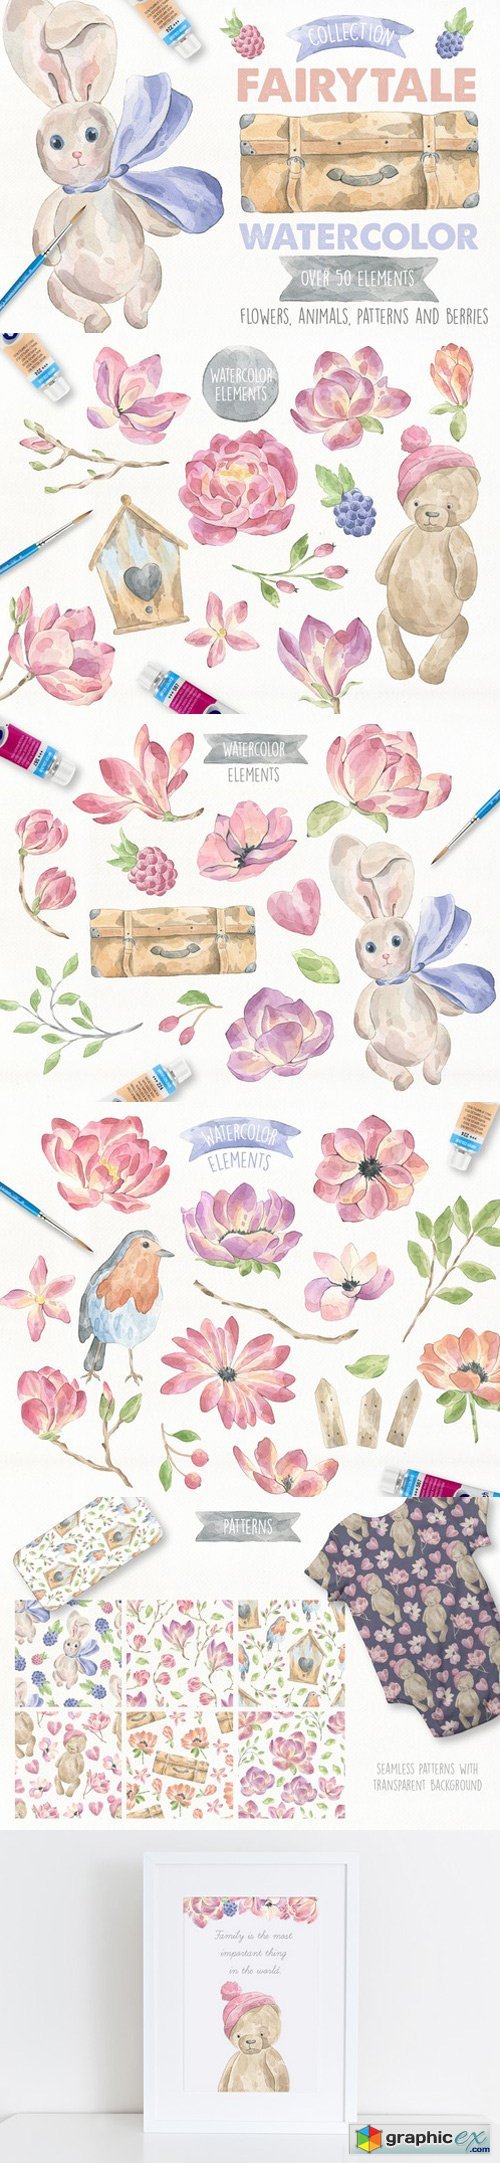 Fairytale Watercolor Collection